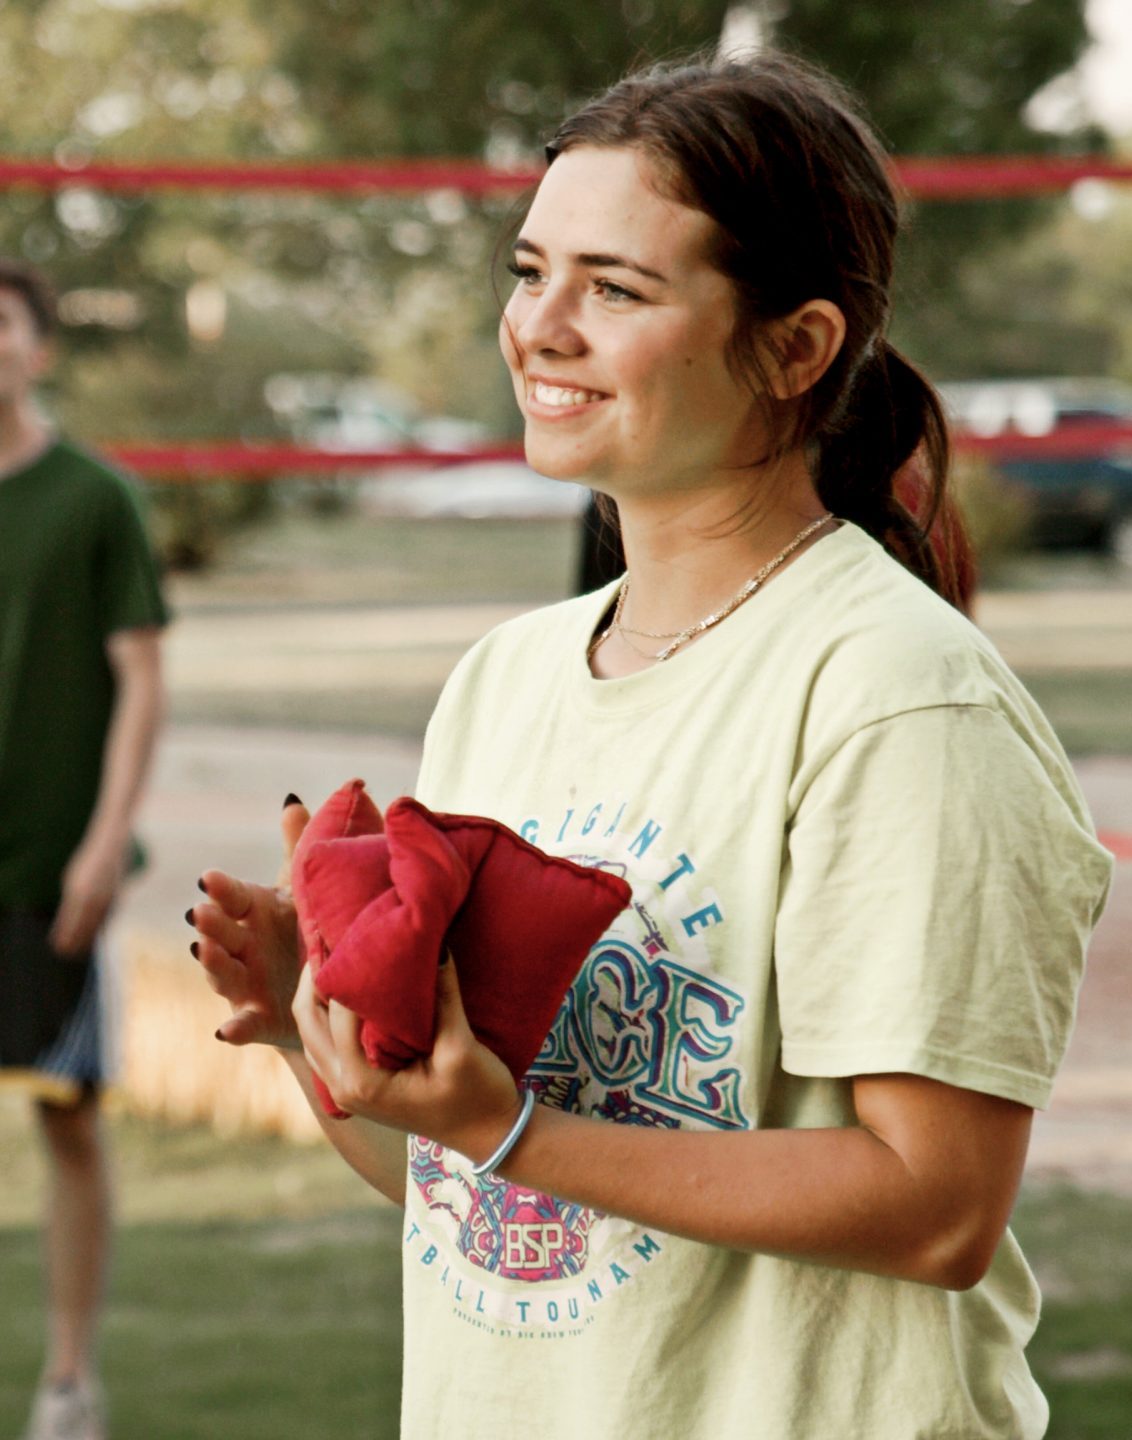 Girl in yellow shirt, smiling while playing a campus game